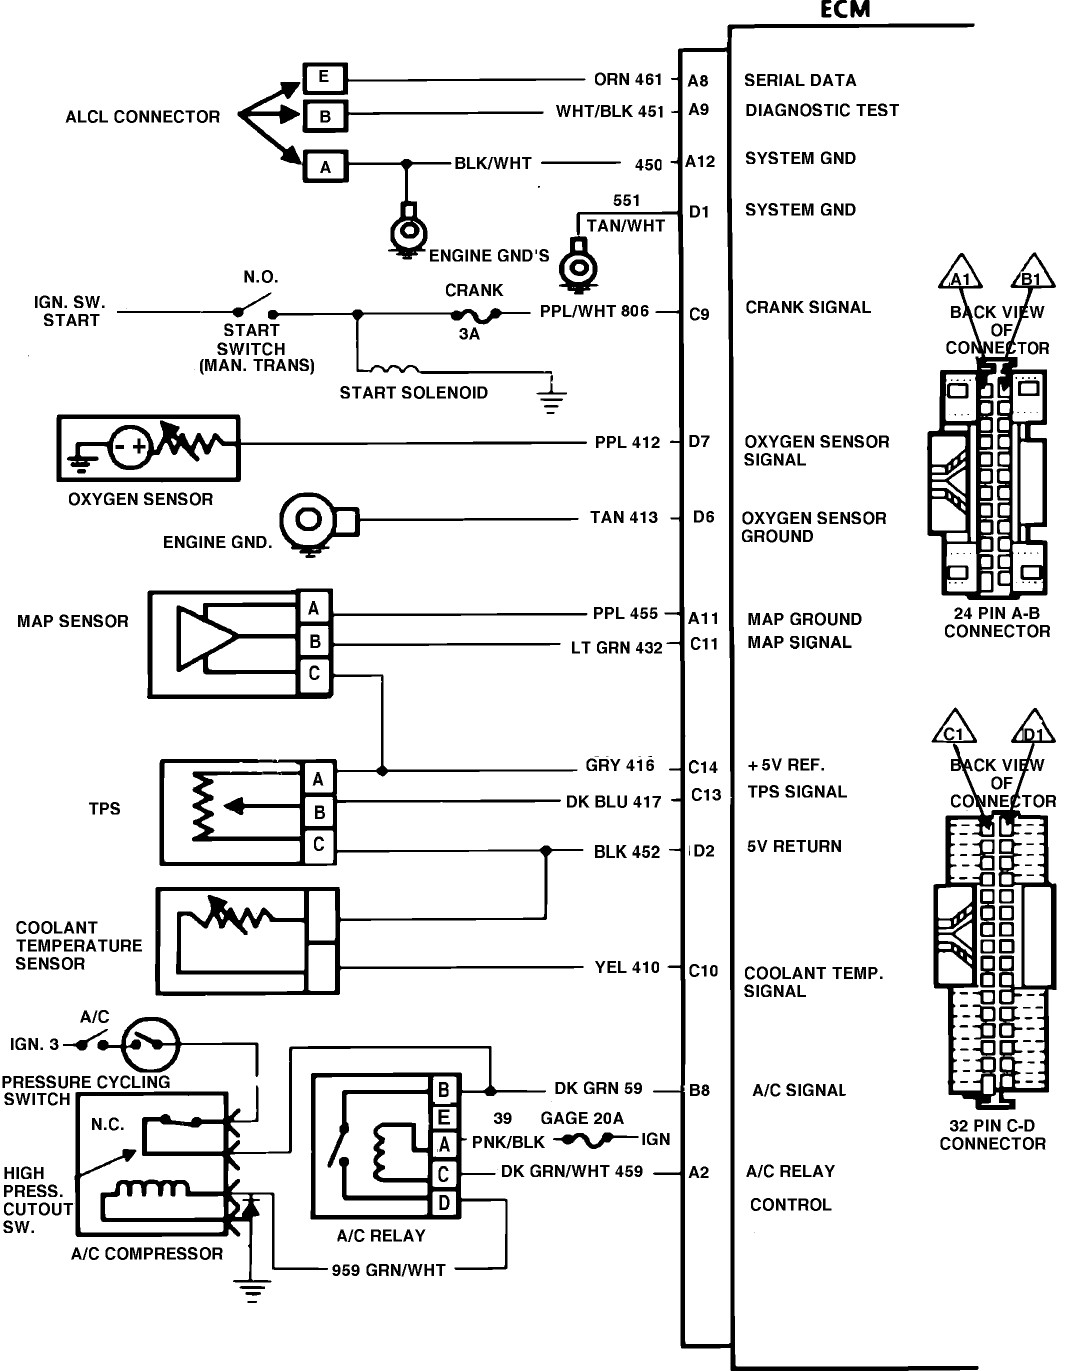 2002 Chevy S10 Radio Wiring Diagram Collection Wiring Diagram For A 1996 S 10 Transmission